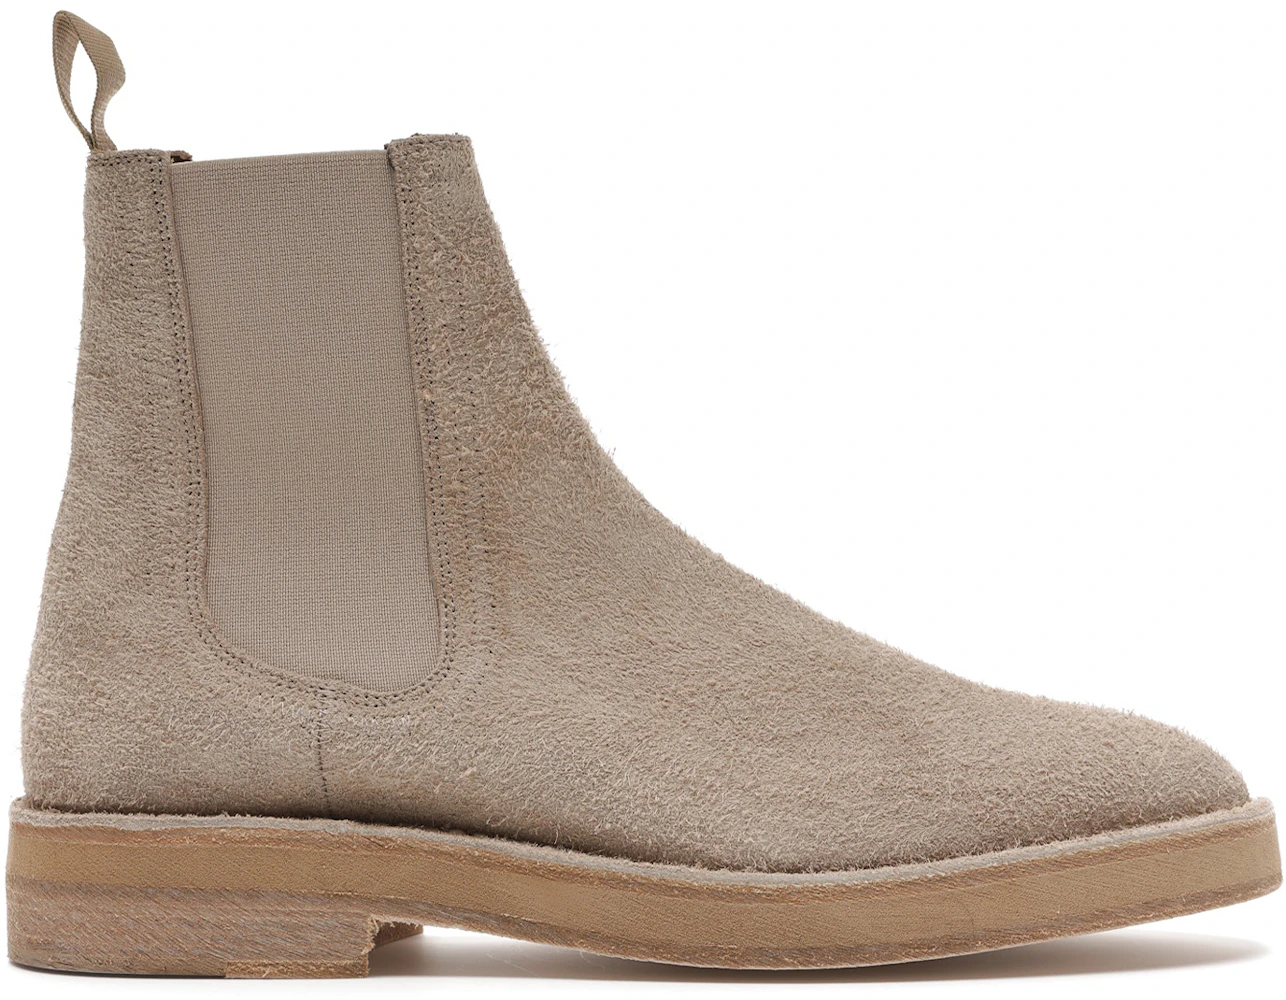 Yeezy Boot Thick Shaggy Suede Taupe Men's - KM5005.038 US